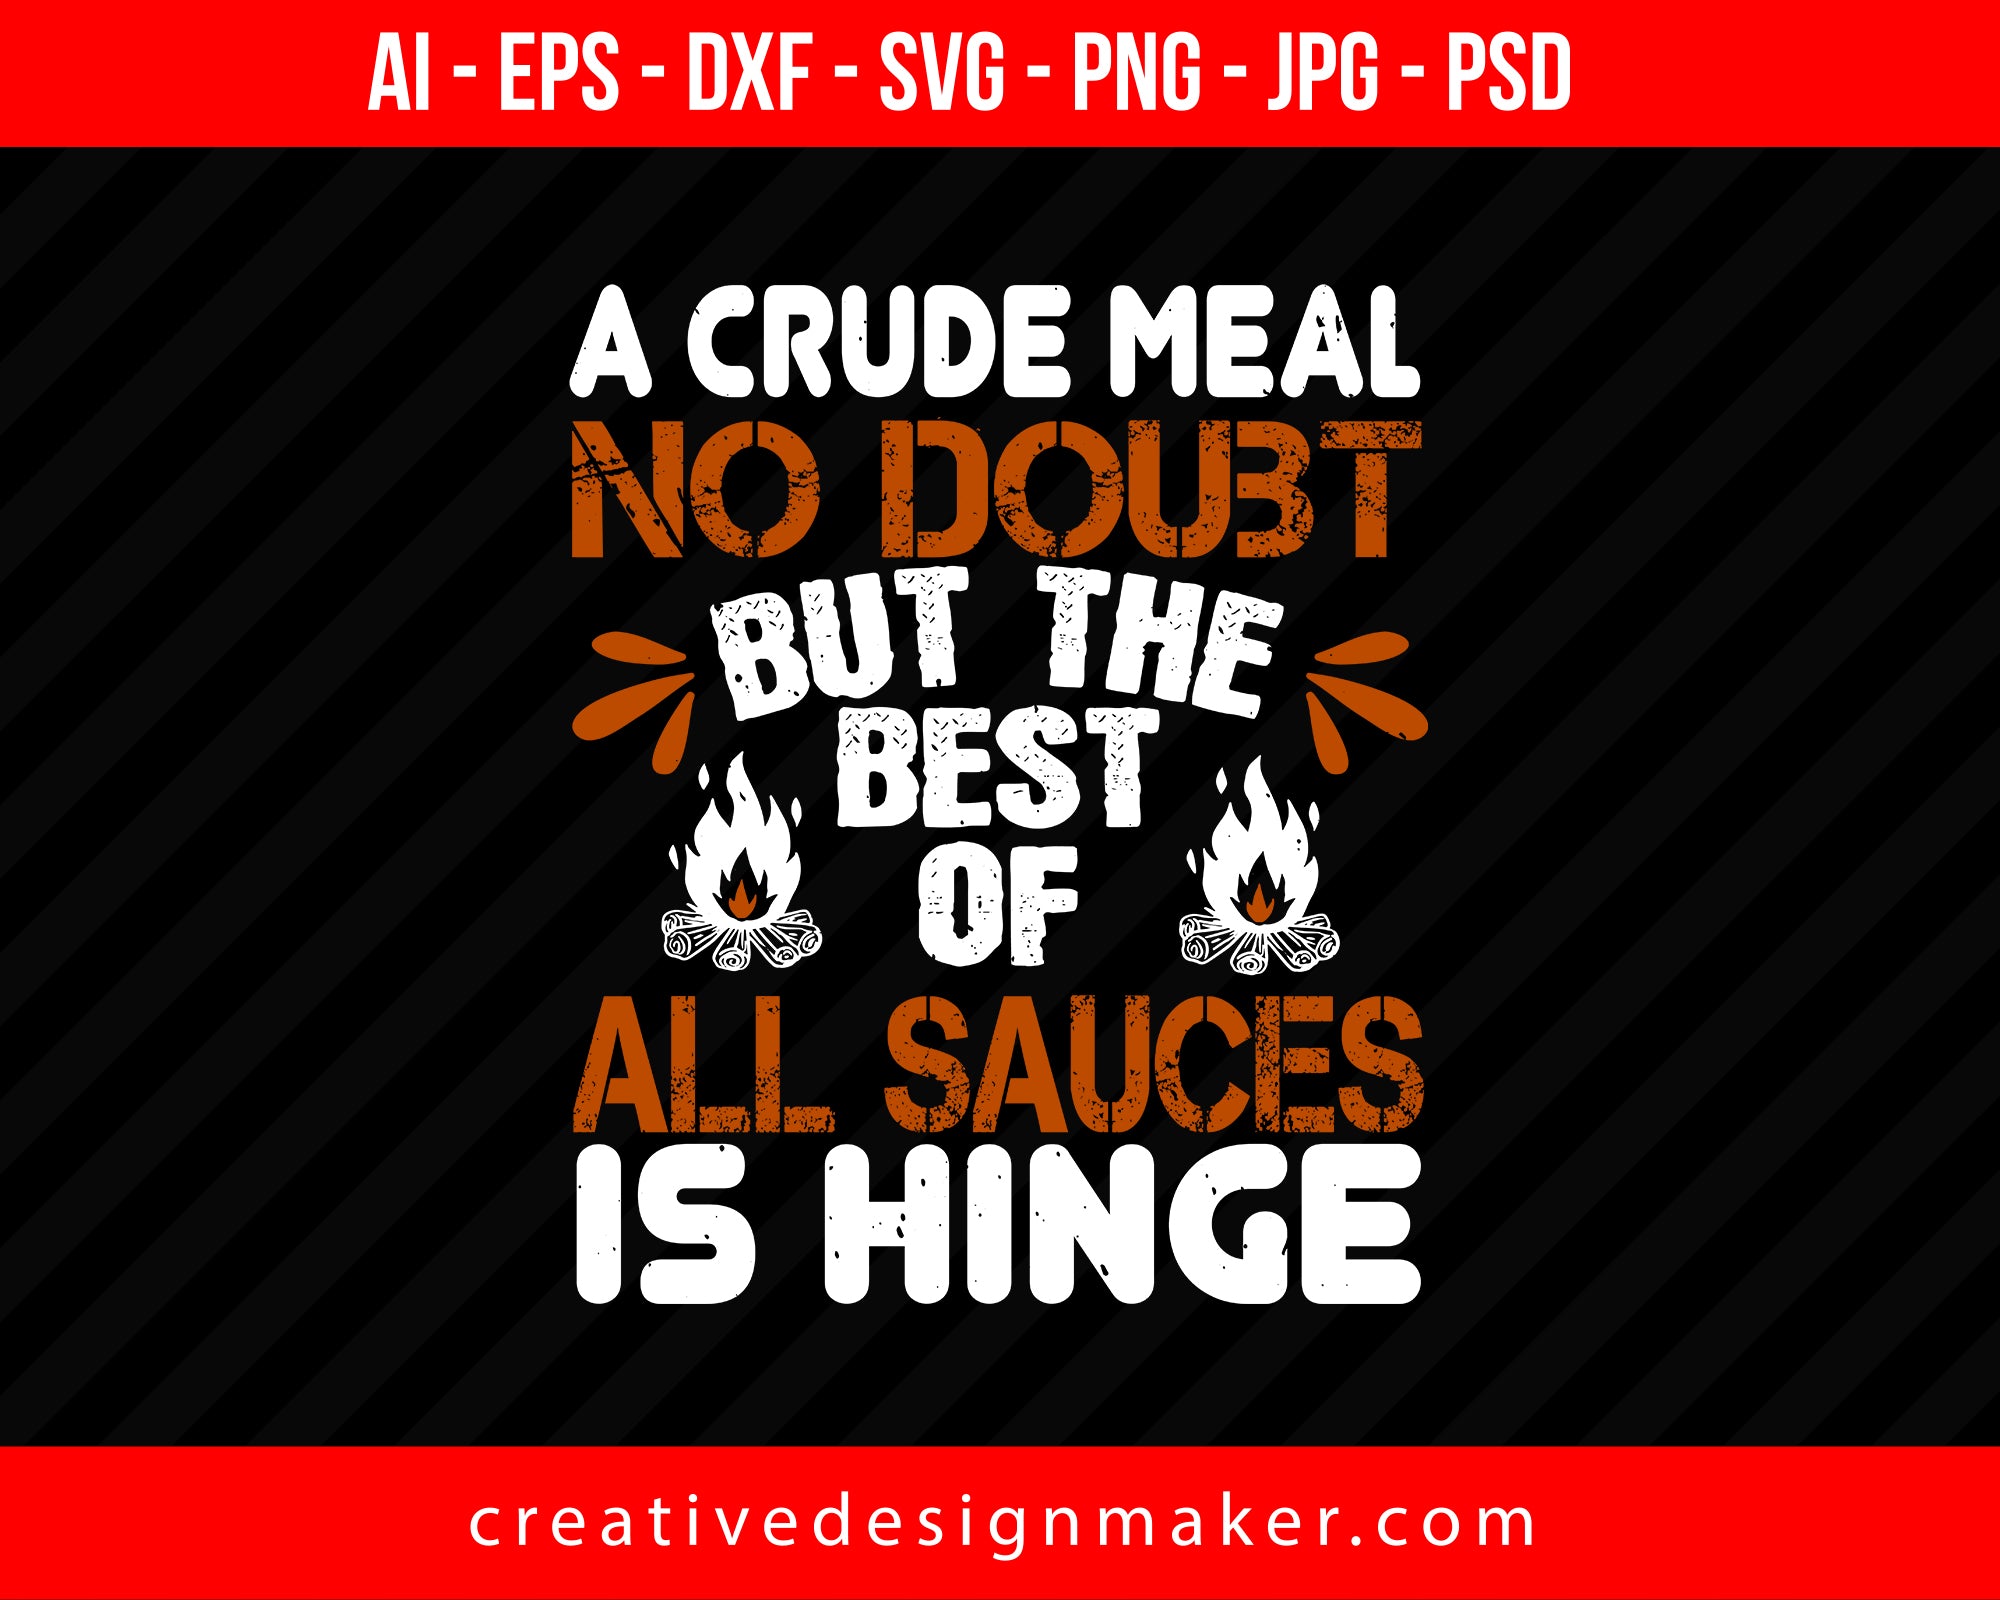 A Crude Meal, No Doubt, But The Best Of All Sauces Is Hinge Hiking Print Ready Editable T-Shirt SVG Design!